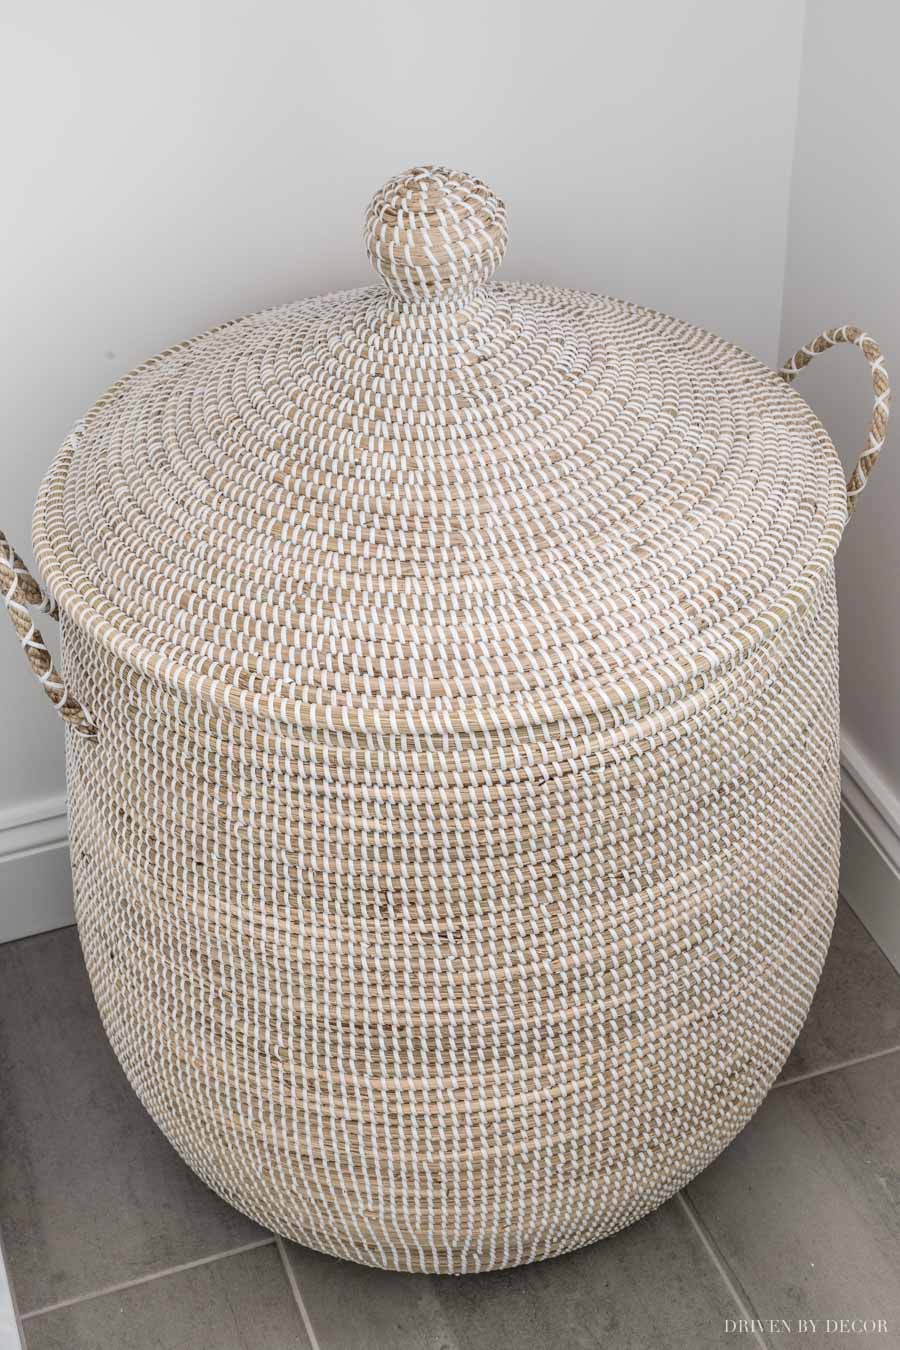 Our large woven seagrass hamper in our master bathroom